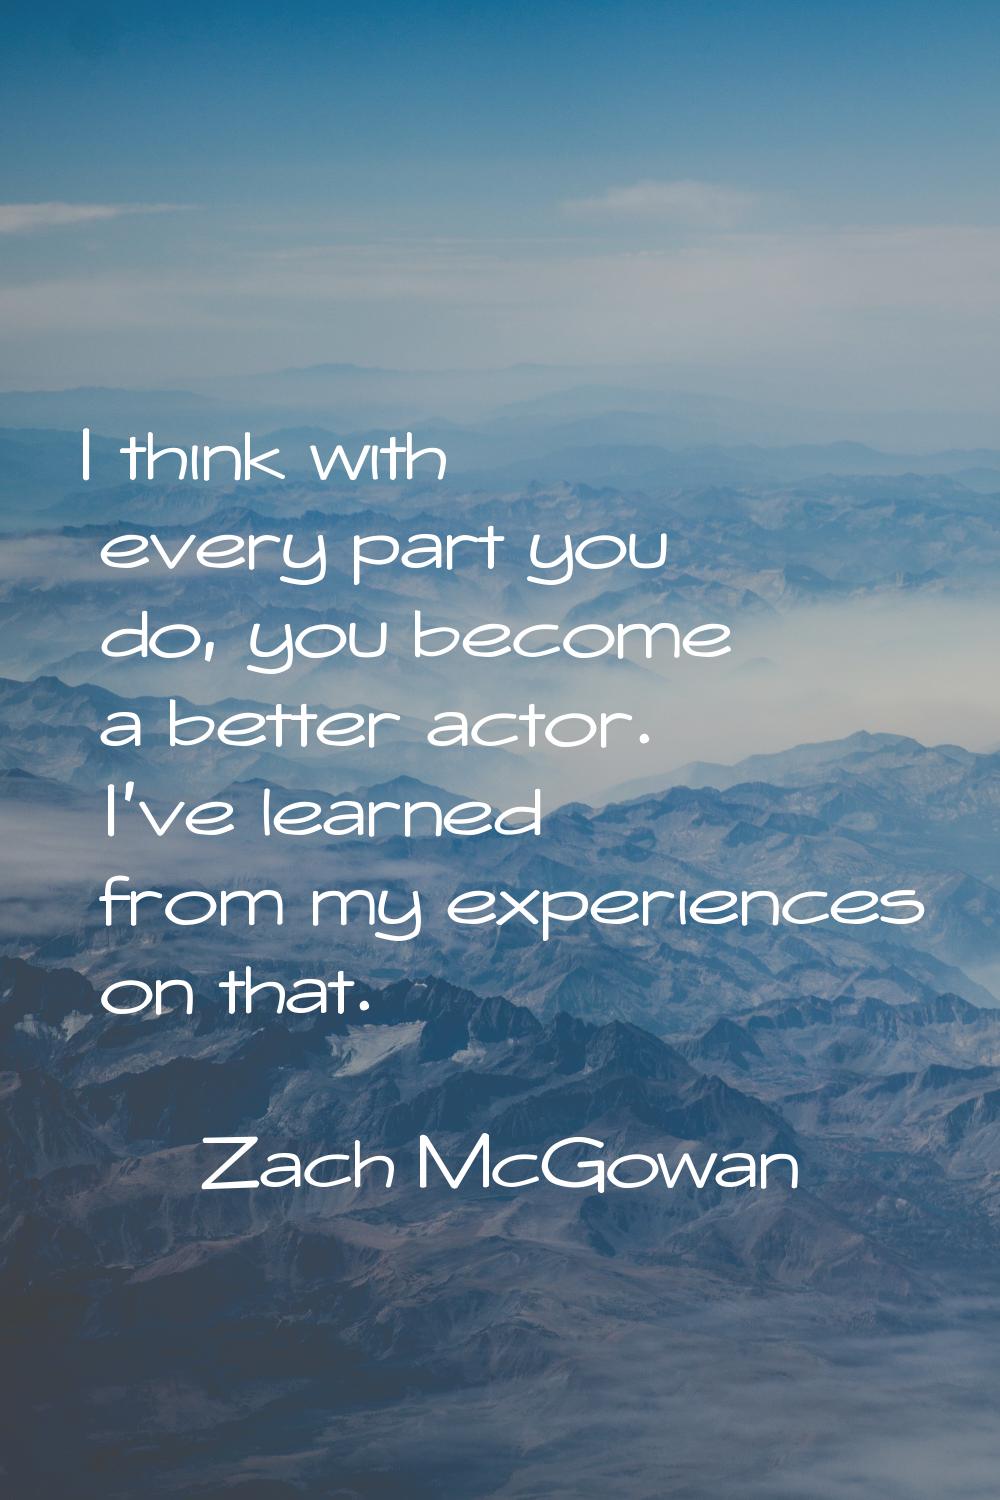 I think with every part you do, you become a better actor. I've learned from my experiences on that